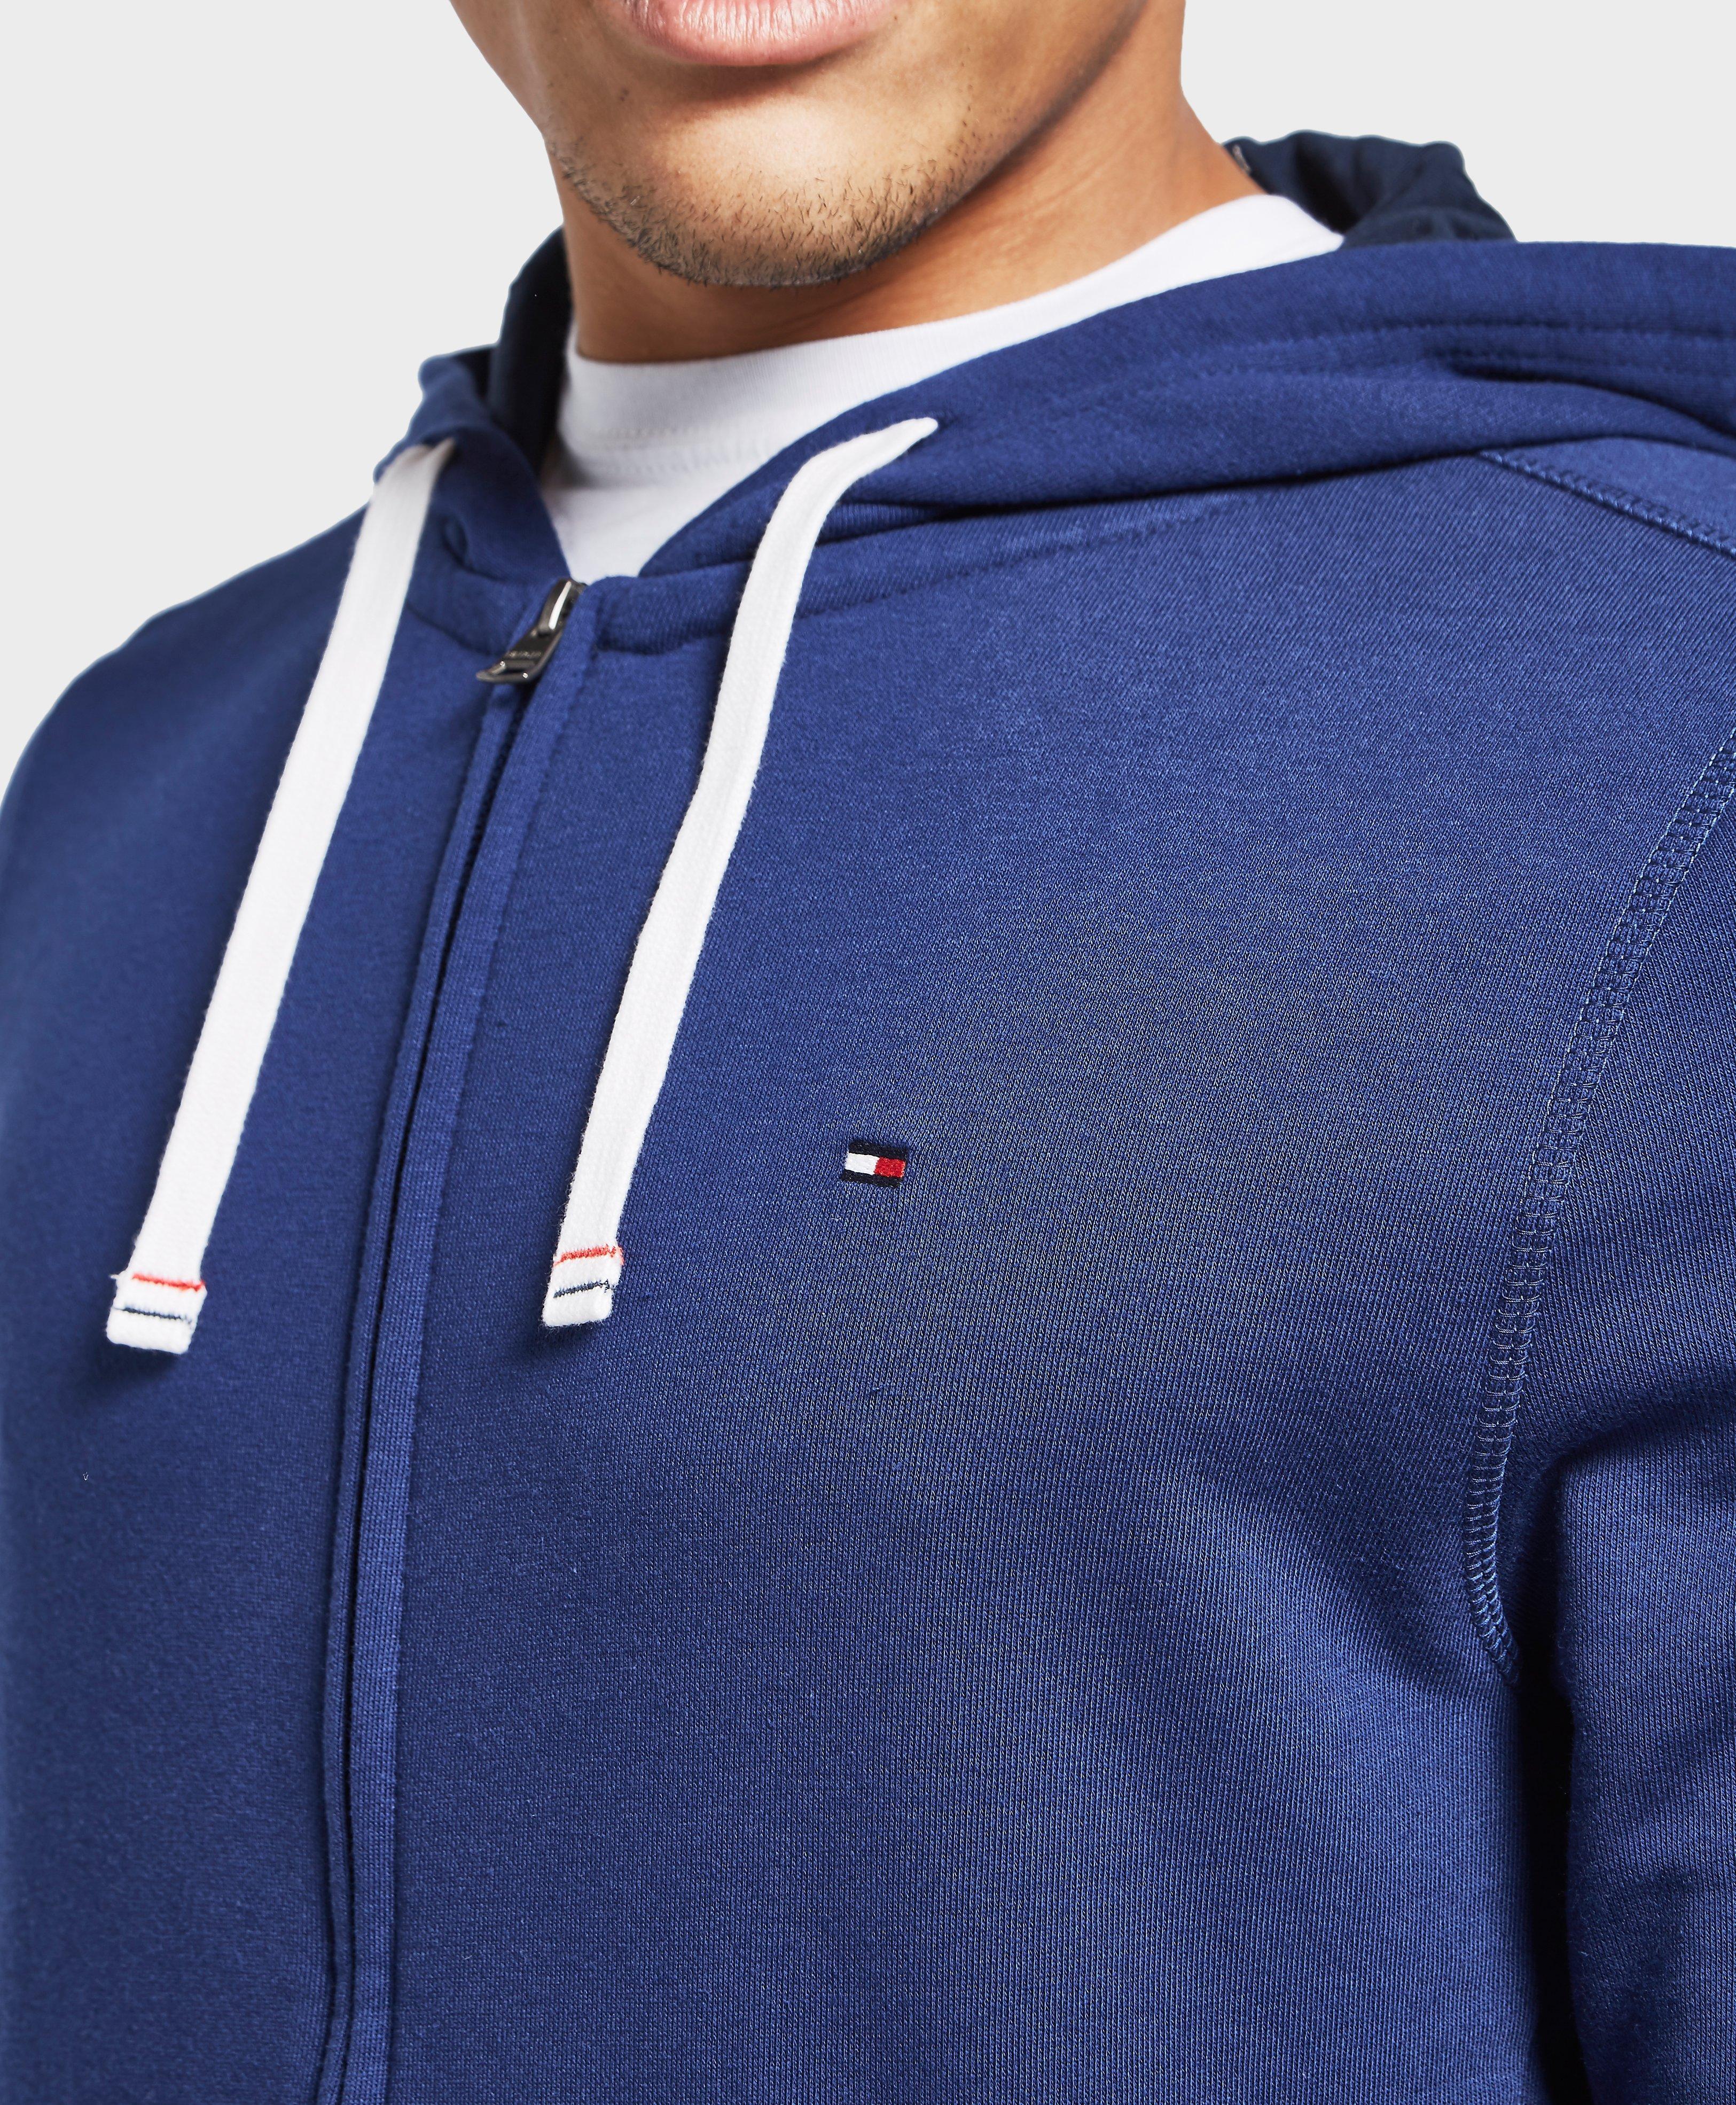 Tommy Hilfiger Cotton Core Full Zip Hoodie in Blue for Men - Lyst